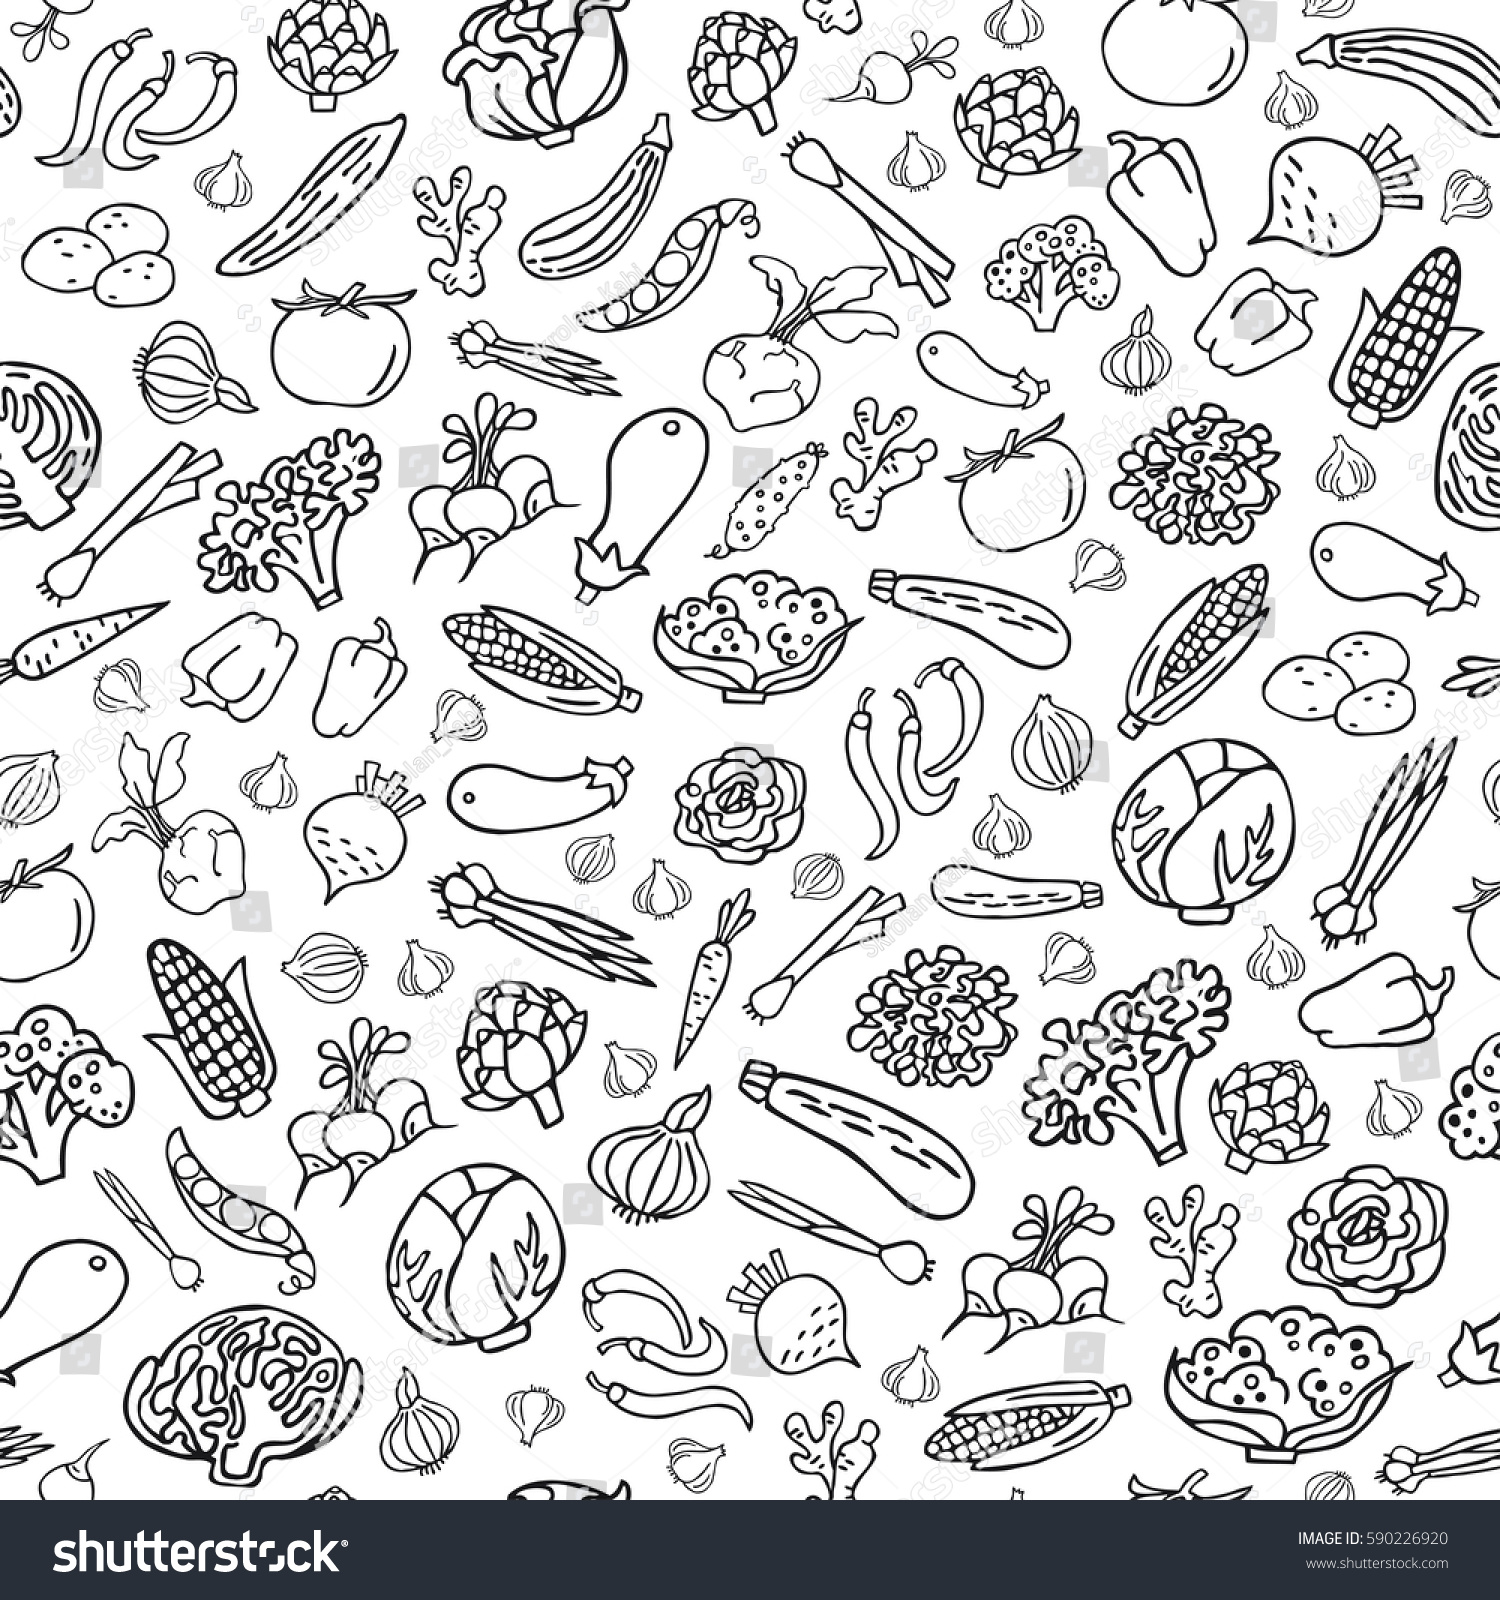 Royalty-free Hand drawn vegetables vector seamless… #590226920 Stock ...